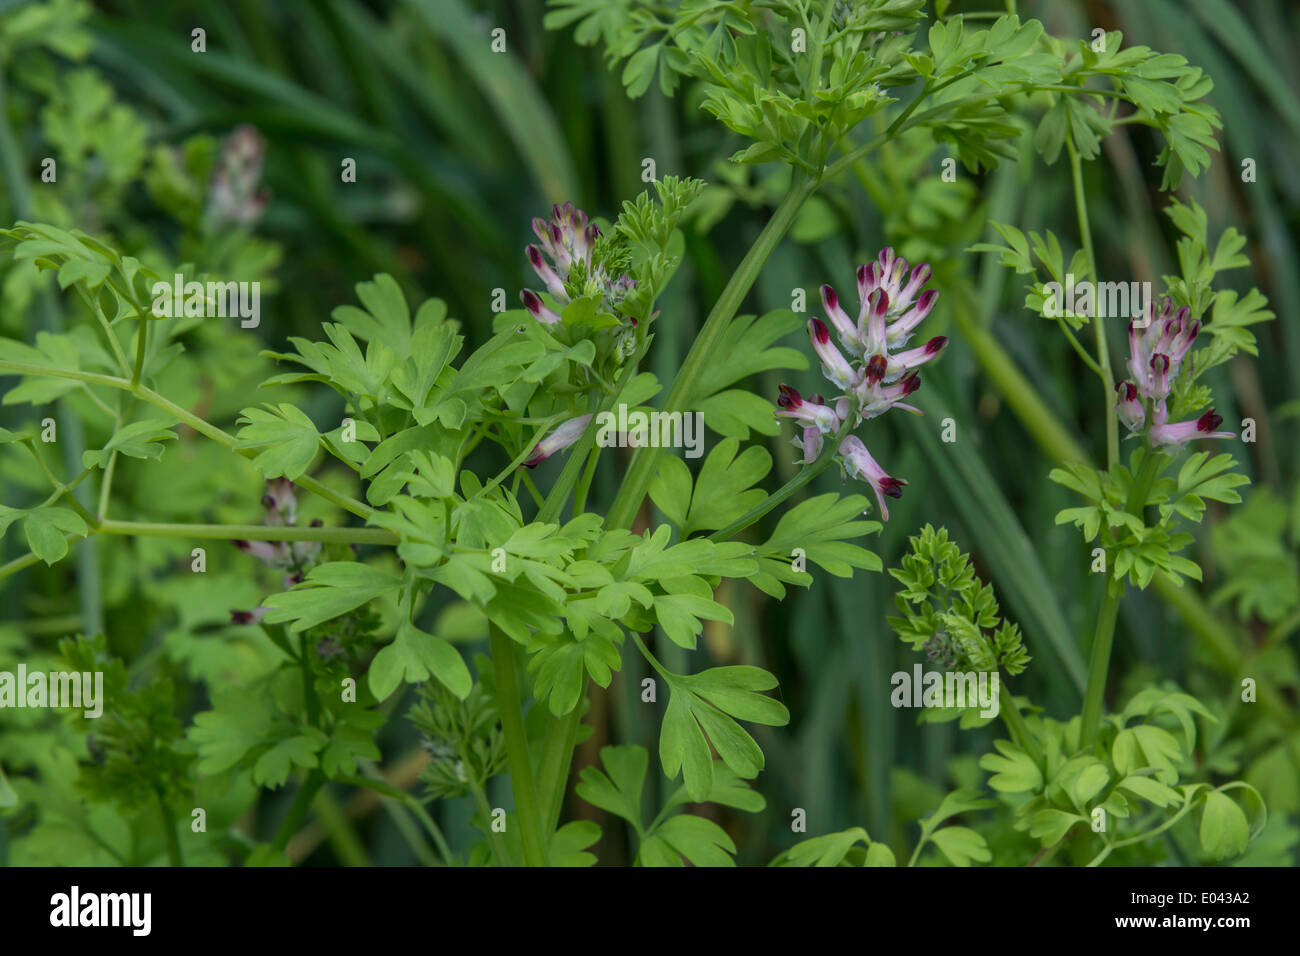 Common Fumitory / Fumaria officinalis - flowers and foliage. Stock Photo